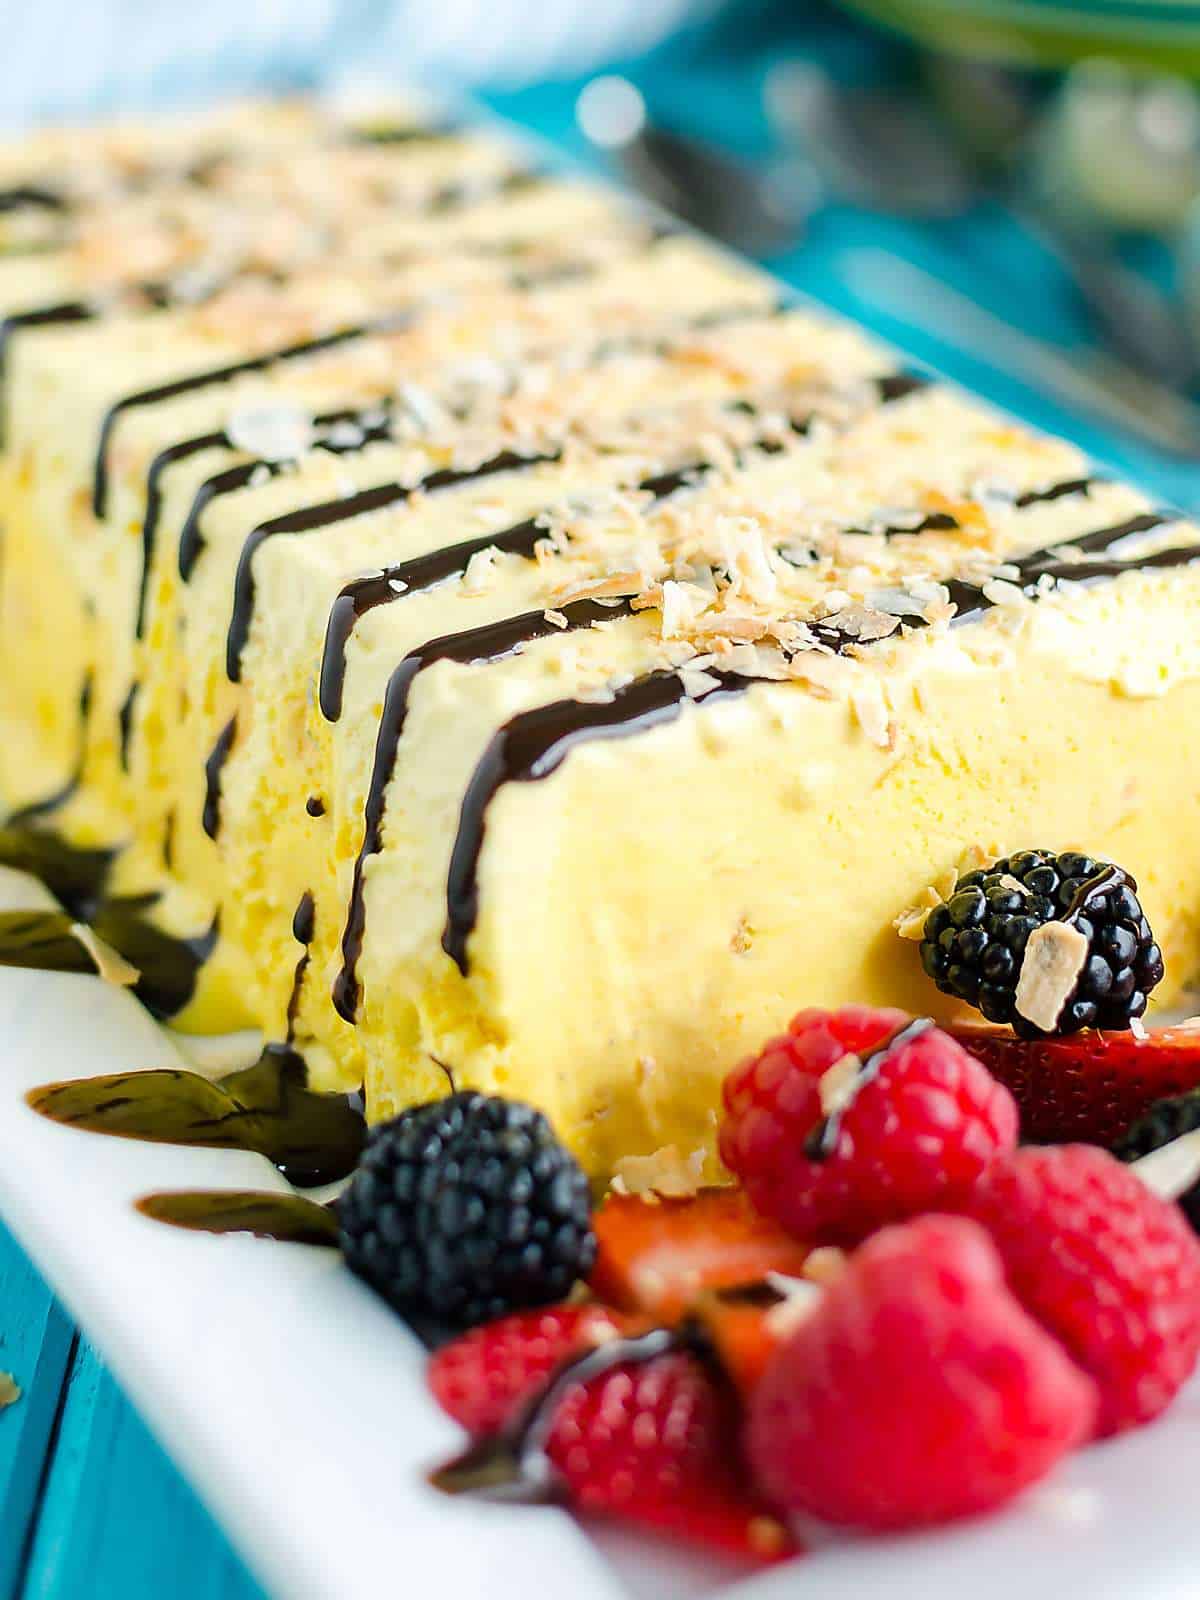 traditional French parfait frozen dessert. Displayed on a platter in the shape of a rectangle/loaf. This one is flavored with coconut, drizzled with chocolate and garnished with fresh berries.